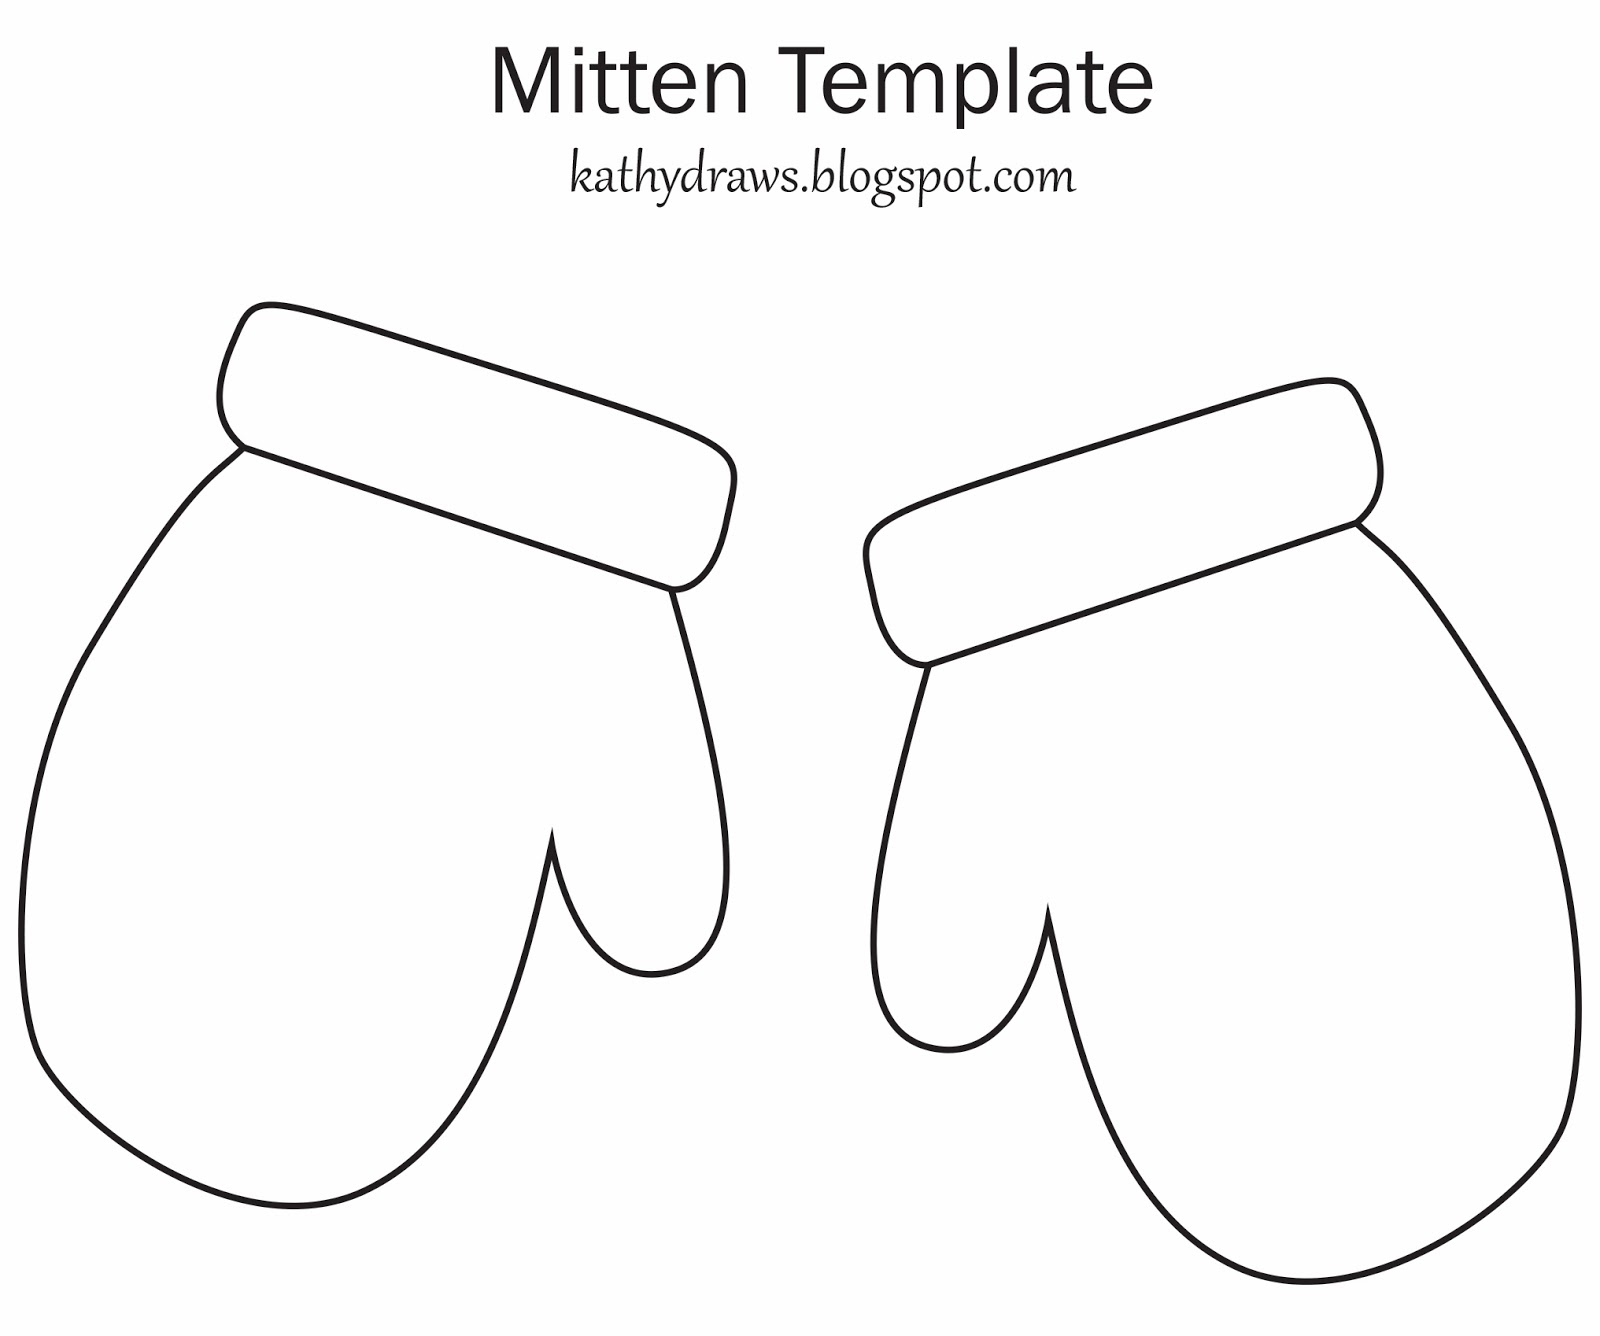 Mittens Template Printable